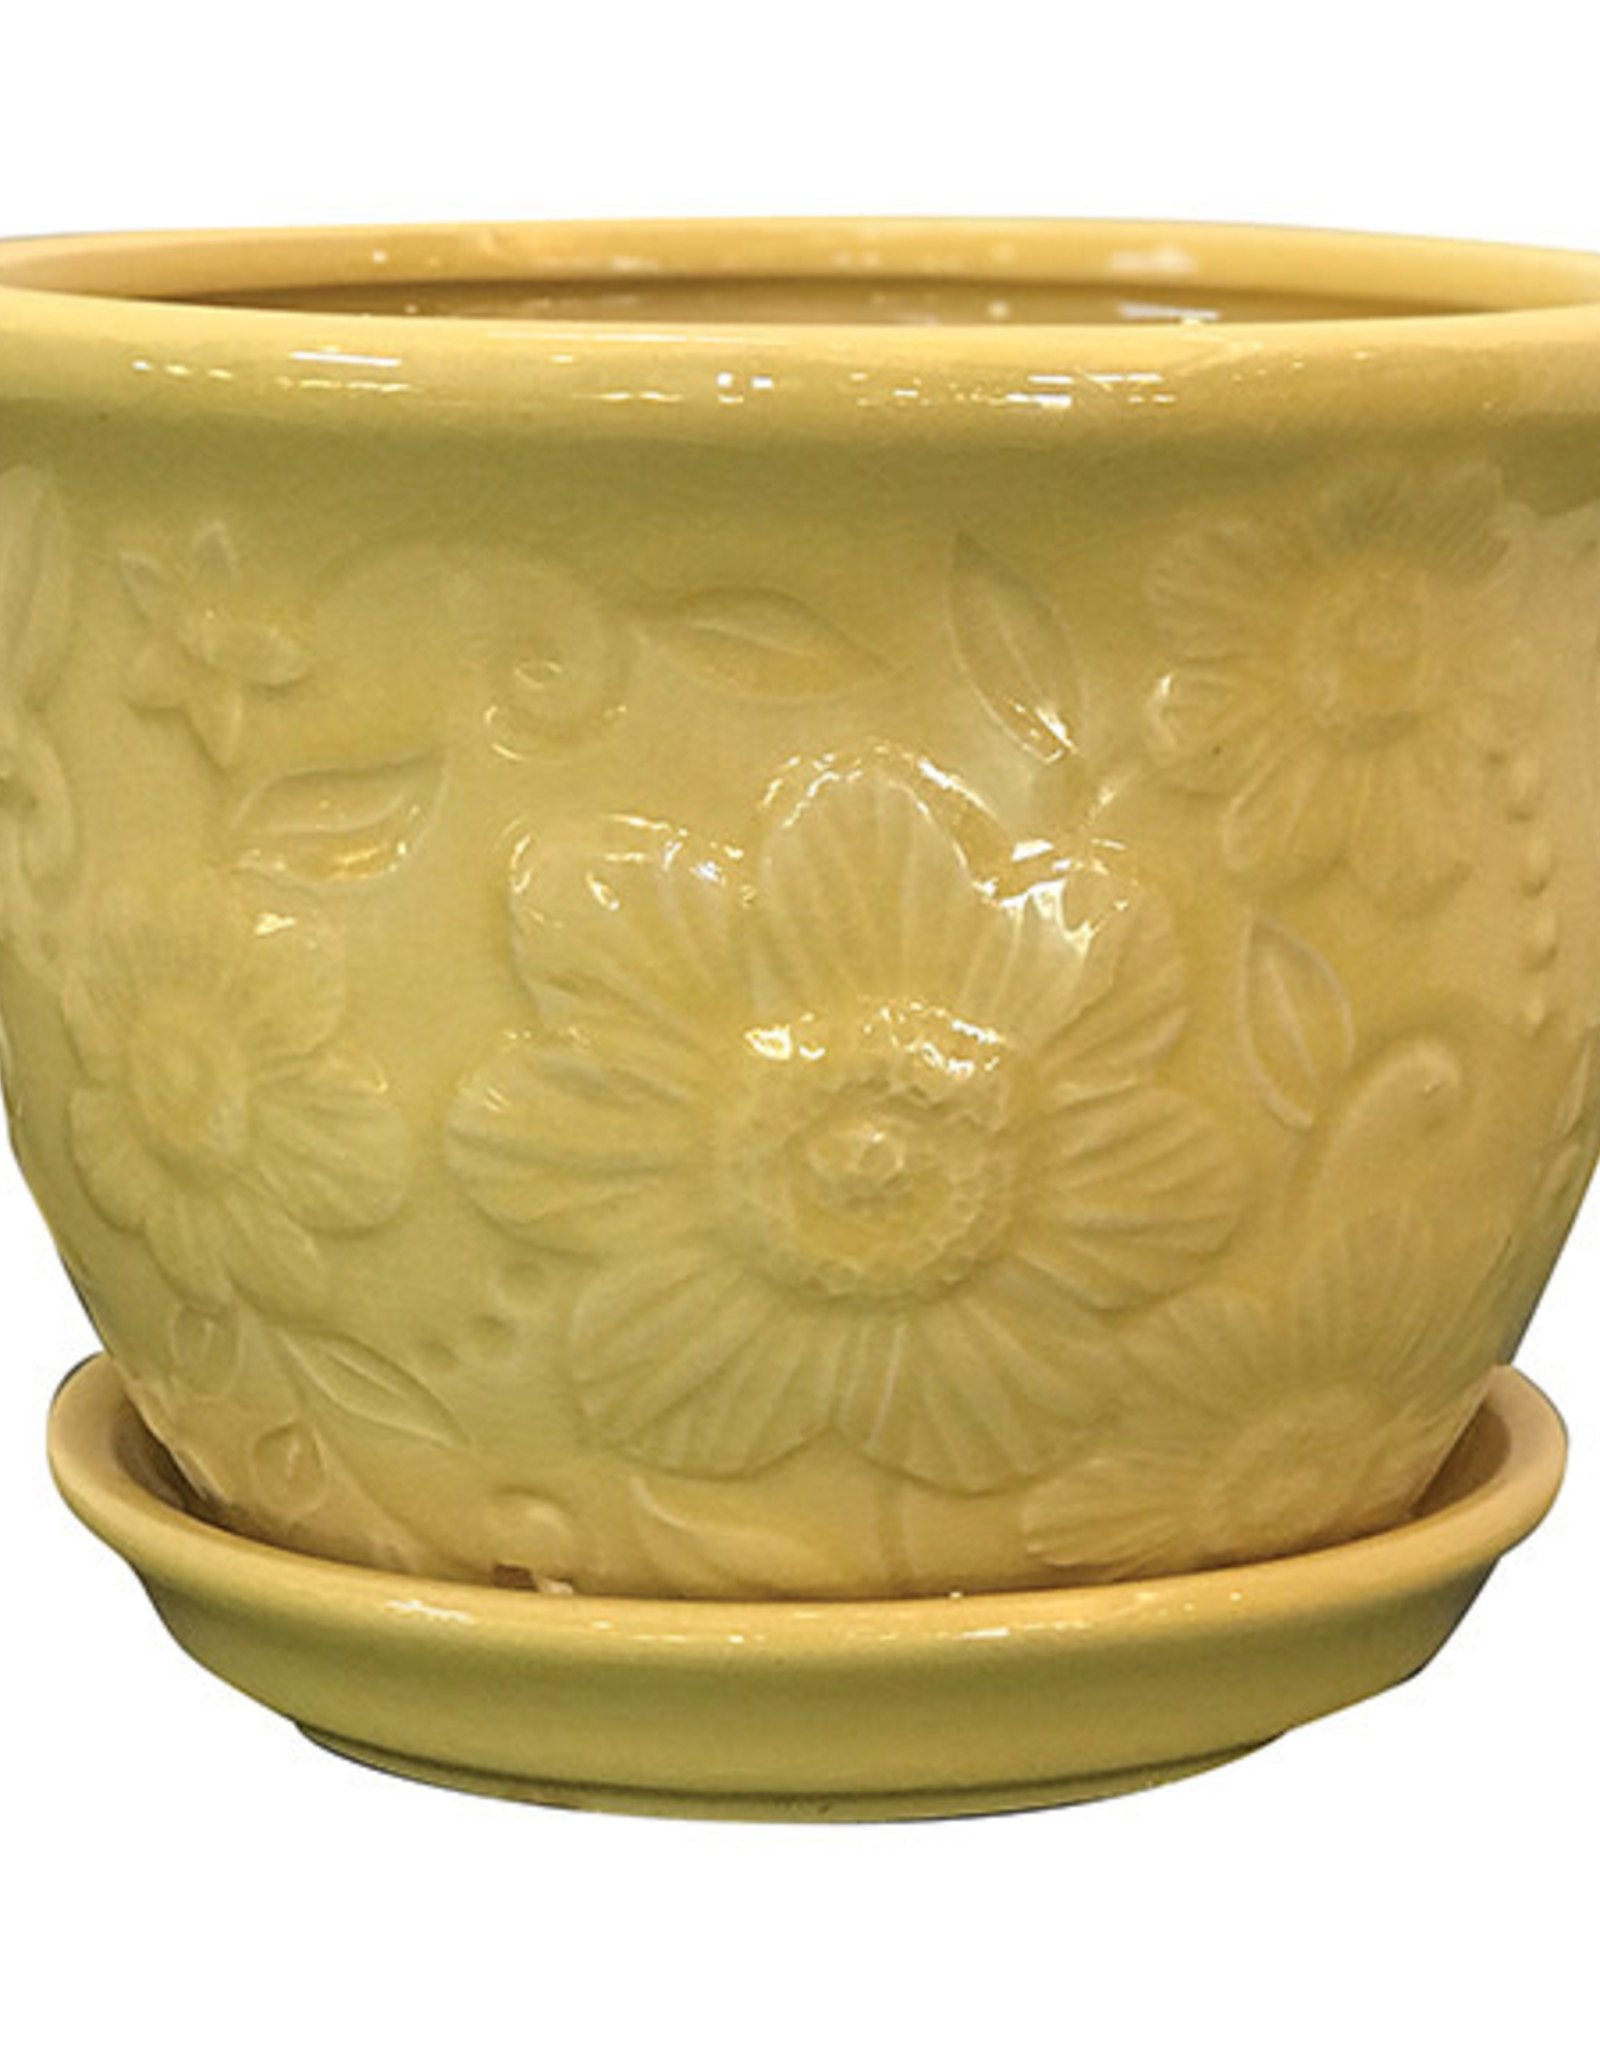 Wildflower Planter with Attached Saucer - Yellow 6"x4.5"